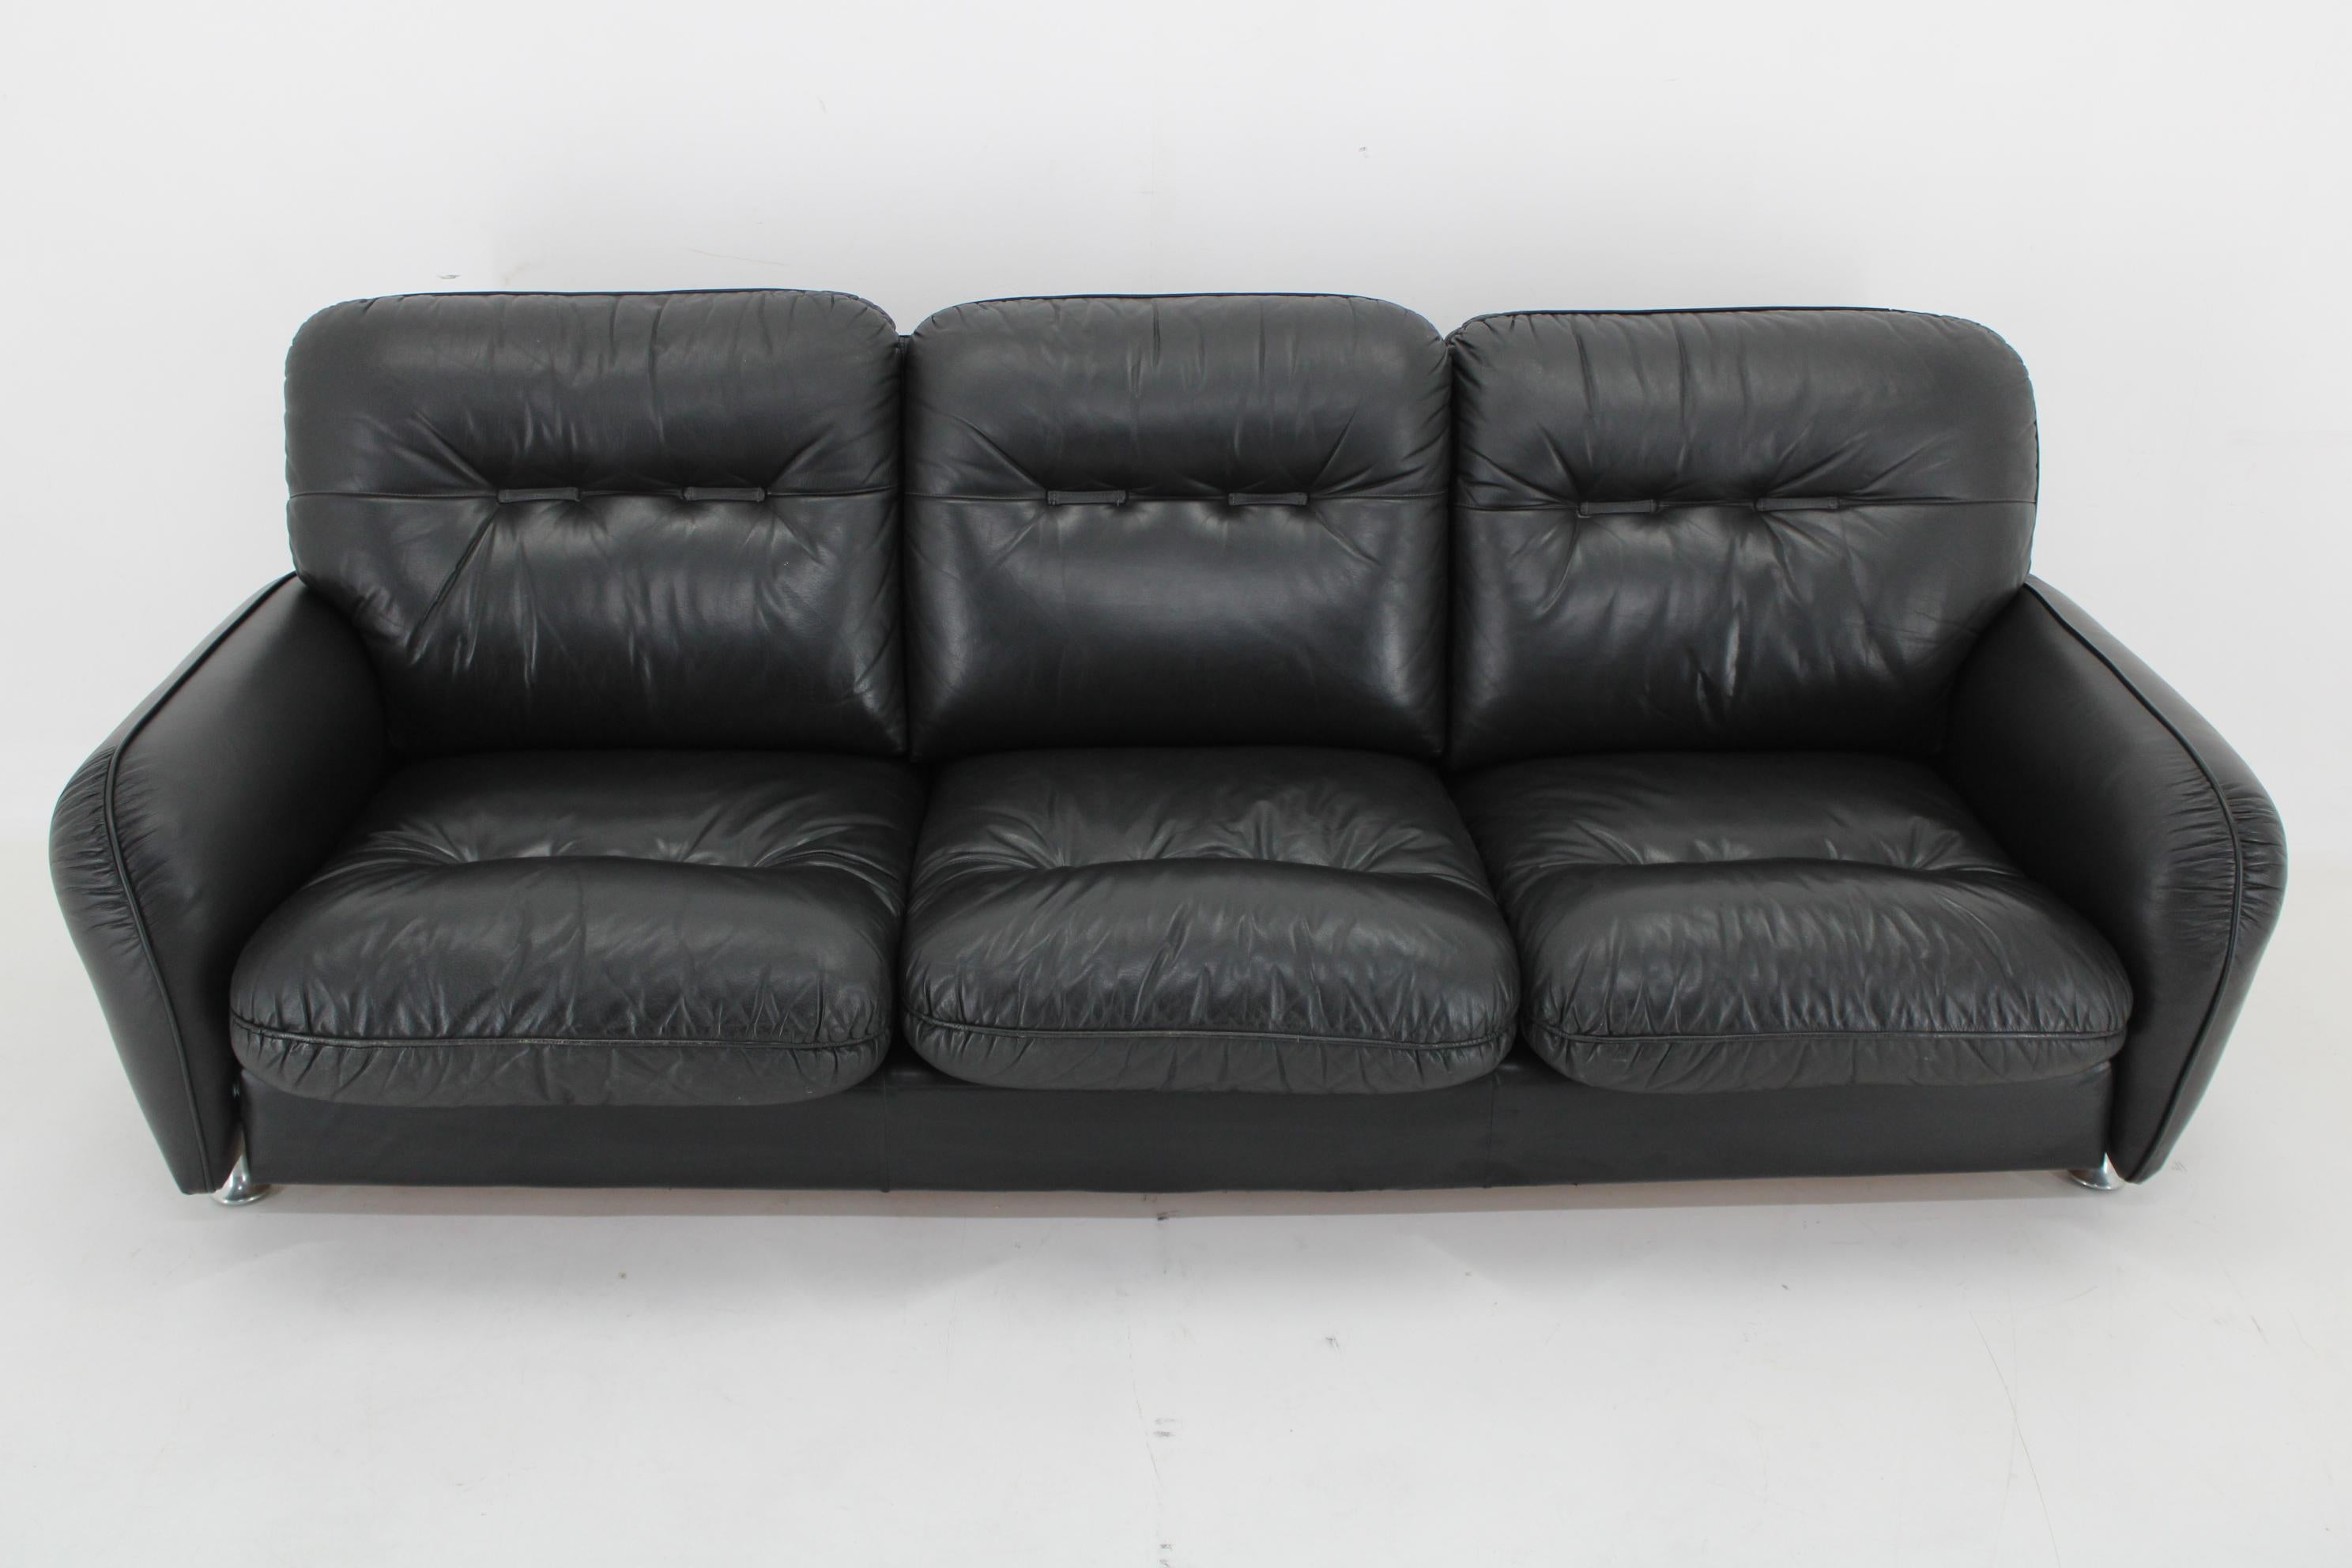  - Good condition with minor signs of use 
- The sides parts were newly reupholstered in very similar black leather
- Cleaned